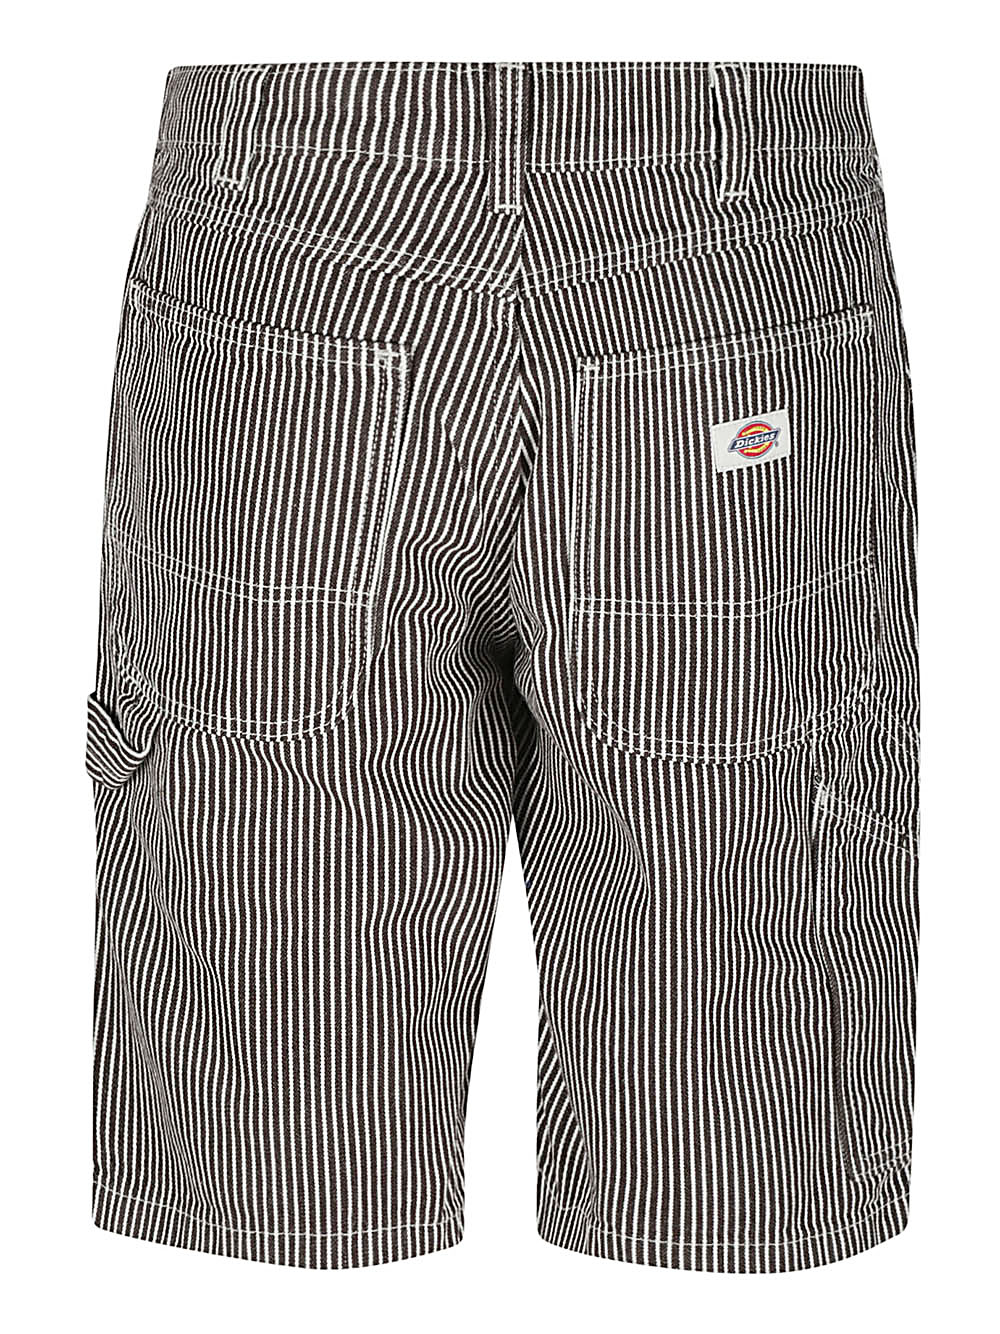 Dickies construct DICKIES CONSTRUCT- Cotton Shorts